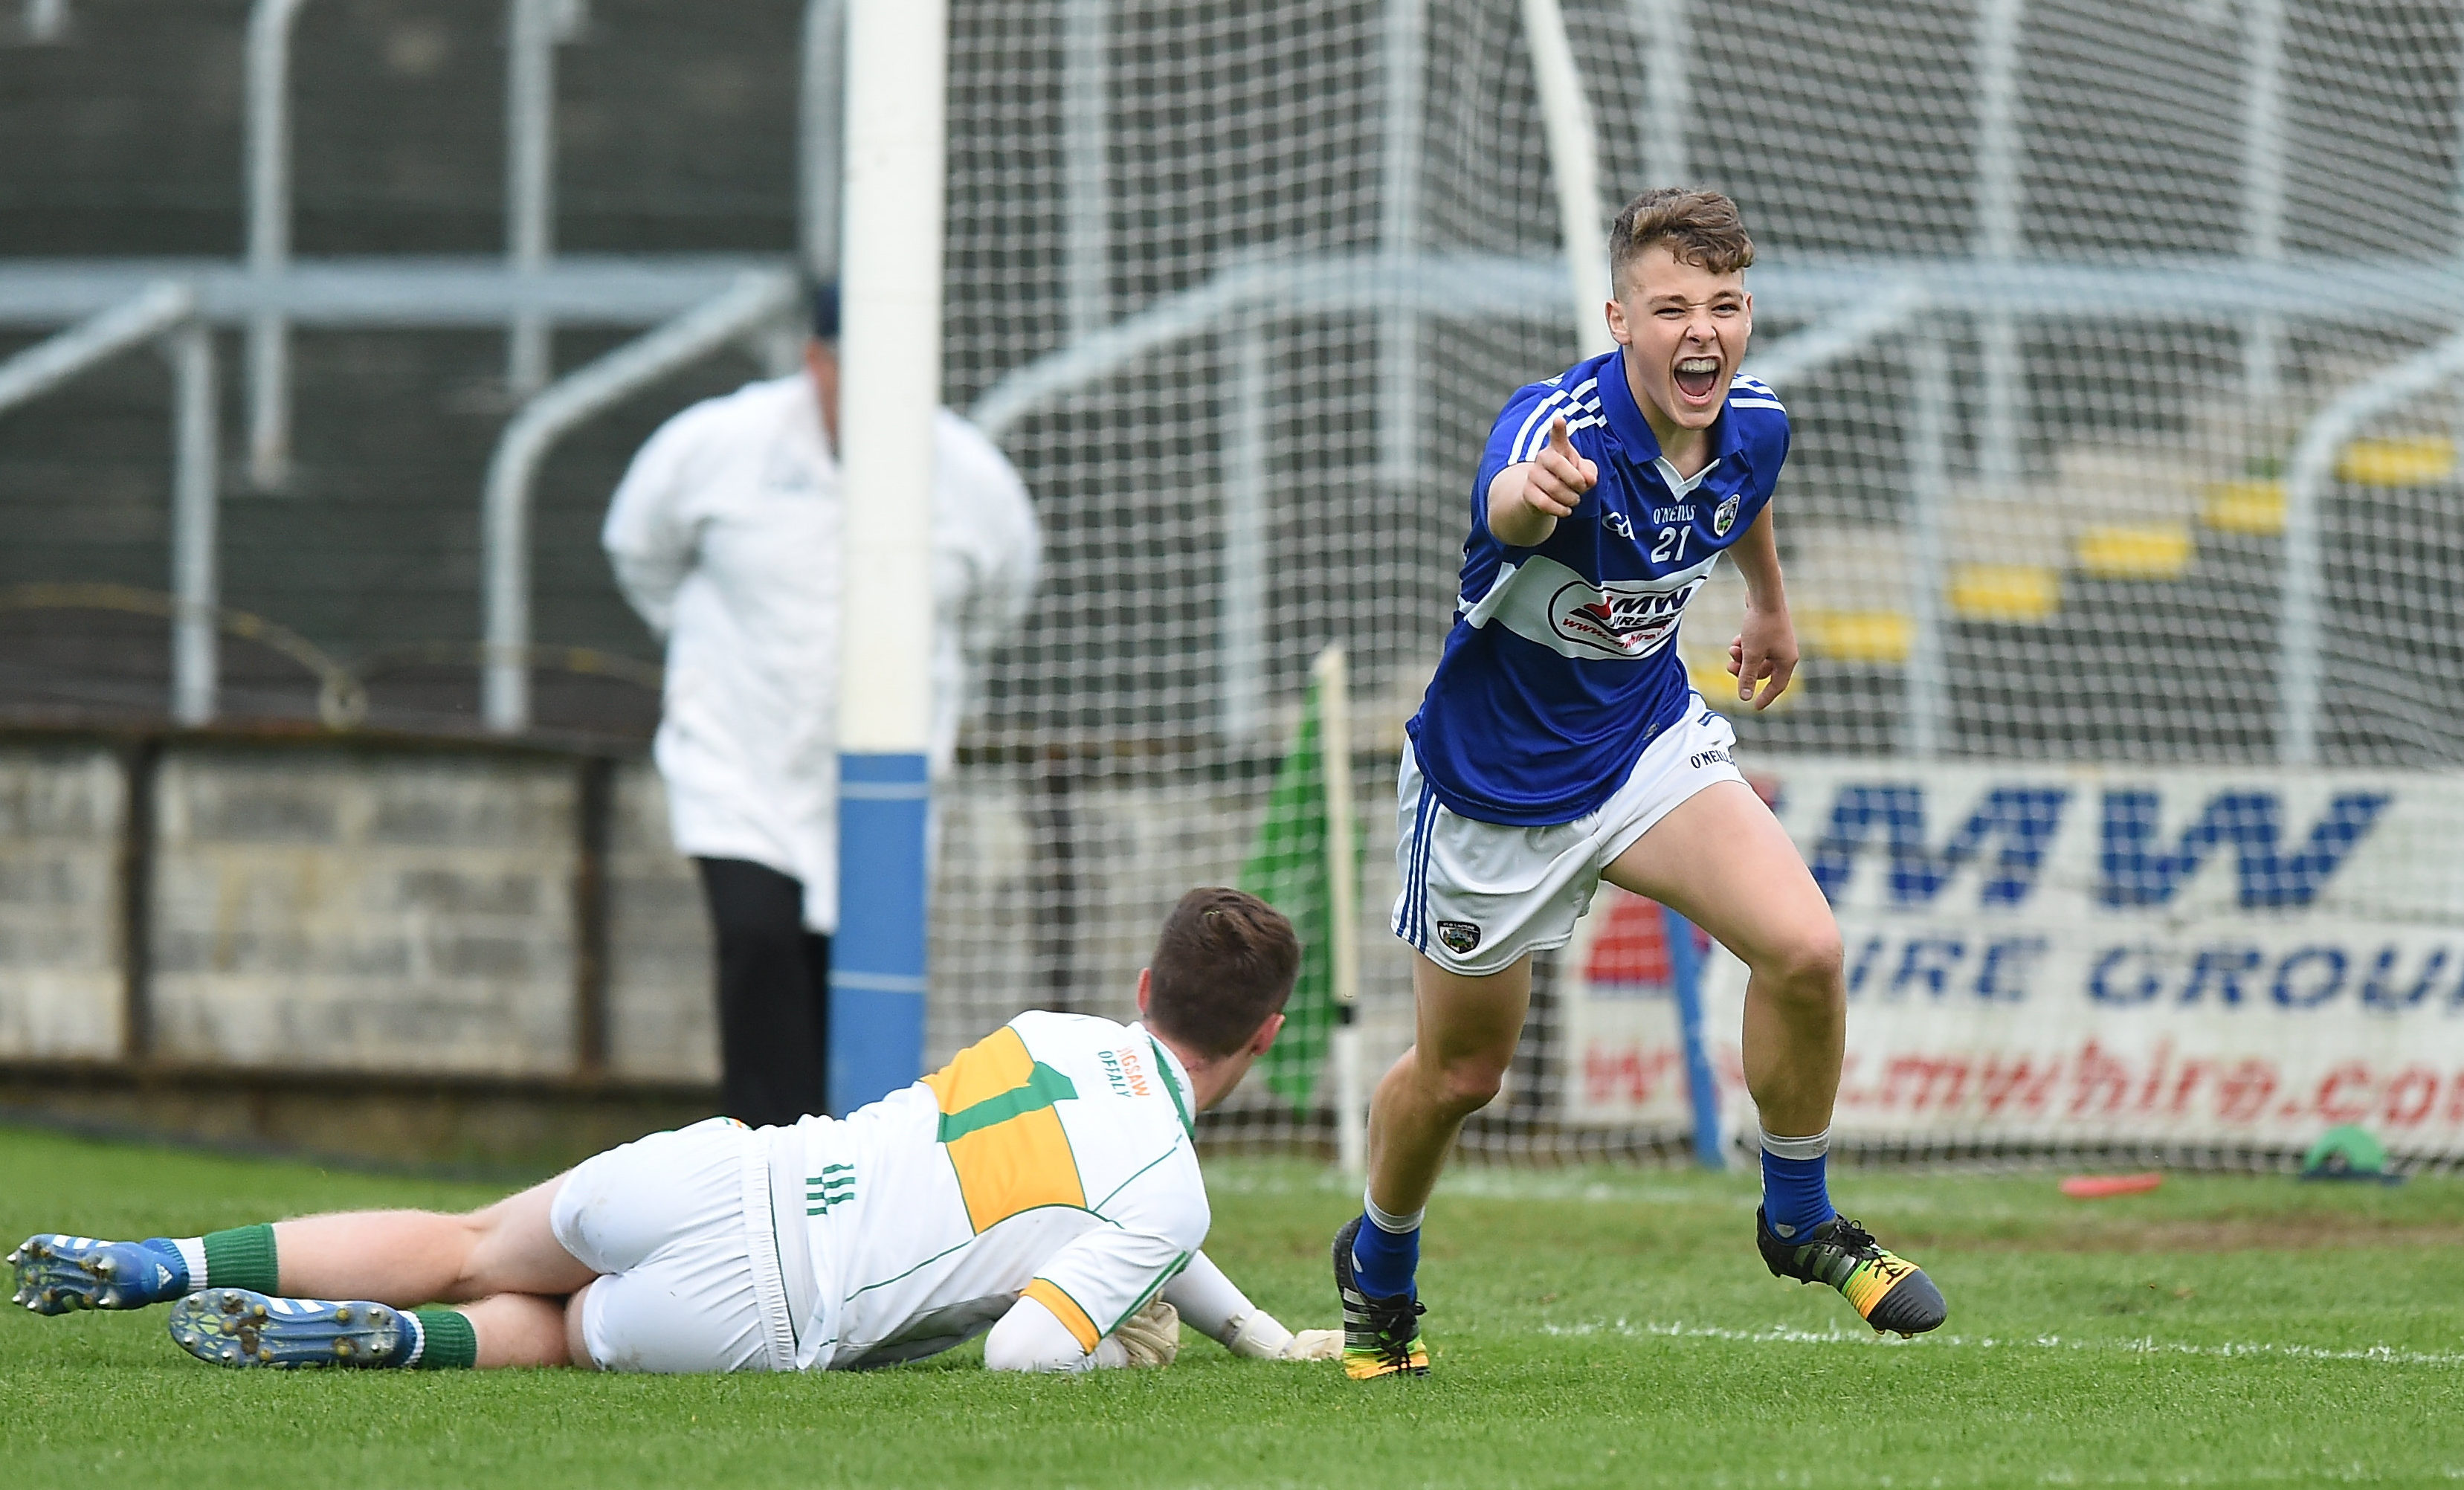 Evan Lowry celebrates after scoring his side's goal during the Leinster Minor Championship Semi-Final match between Laois and Offaly 